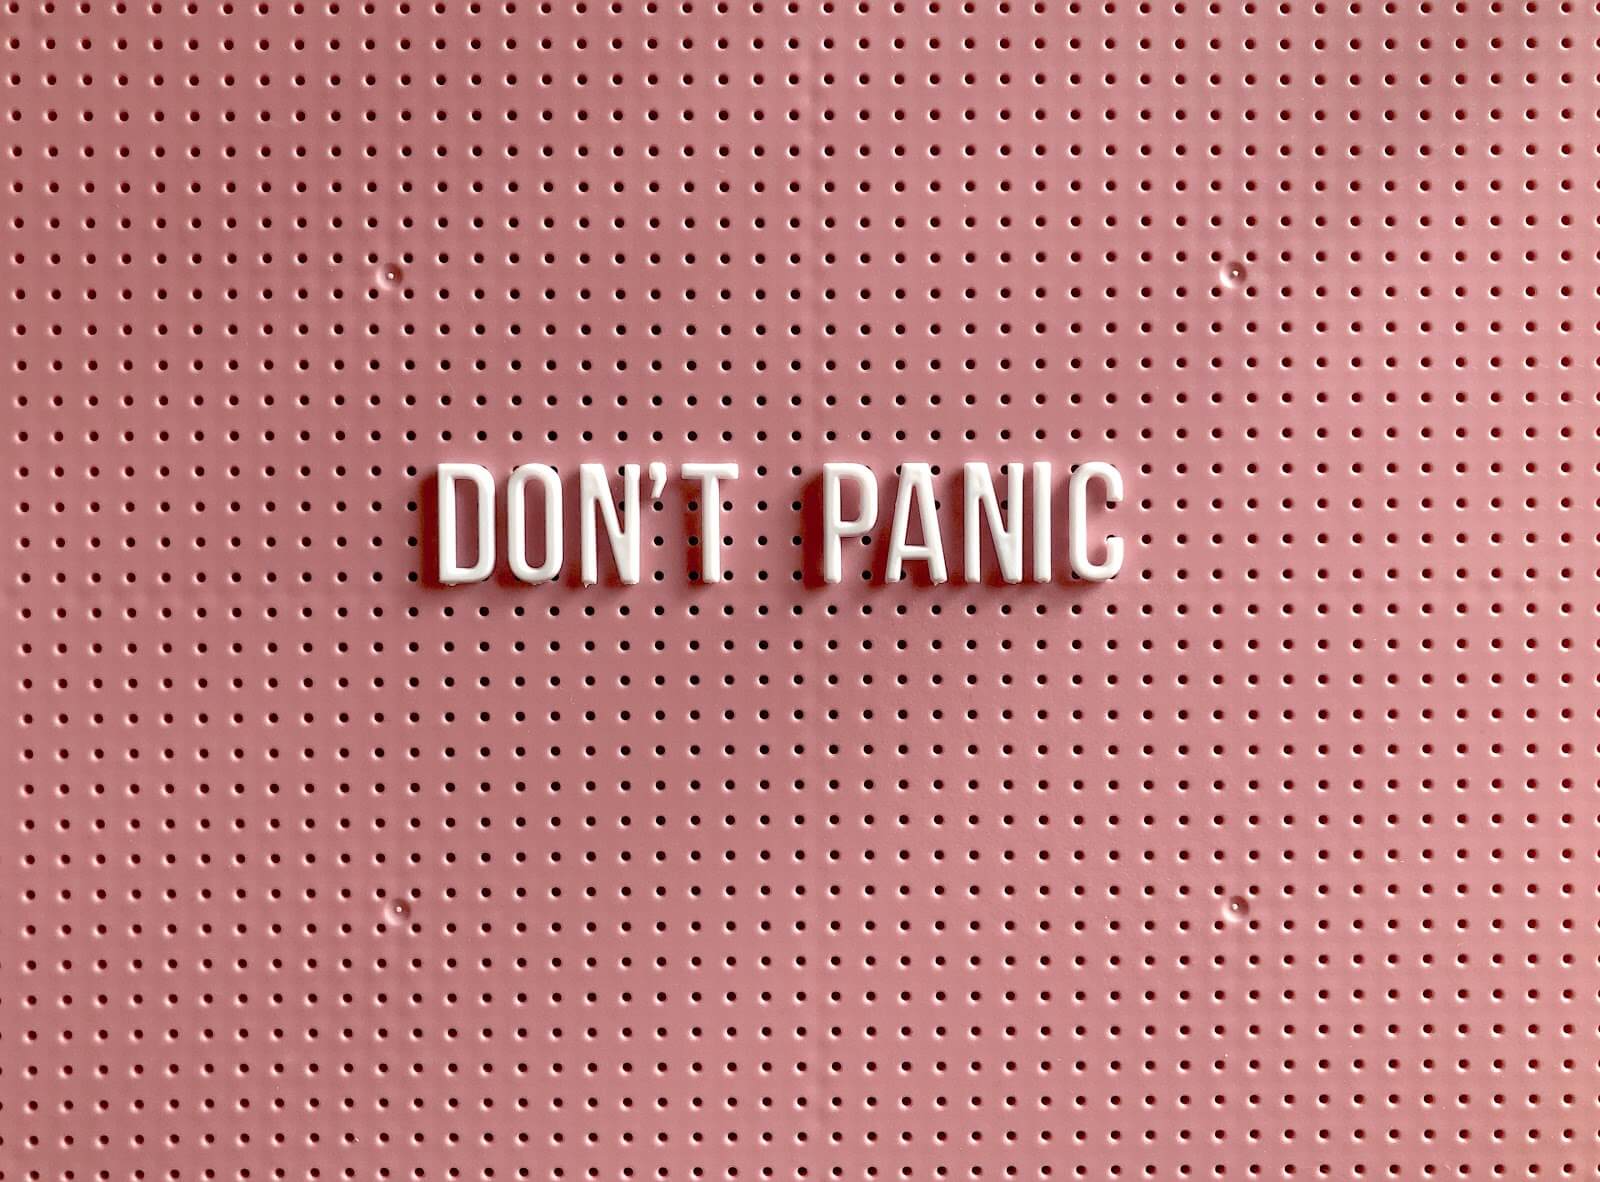 a rose pink metal board with the words "don't panic" in the center